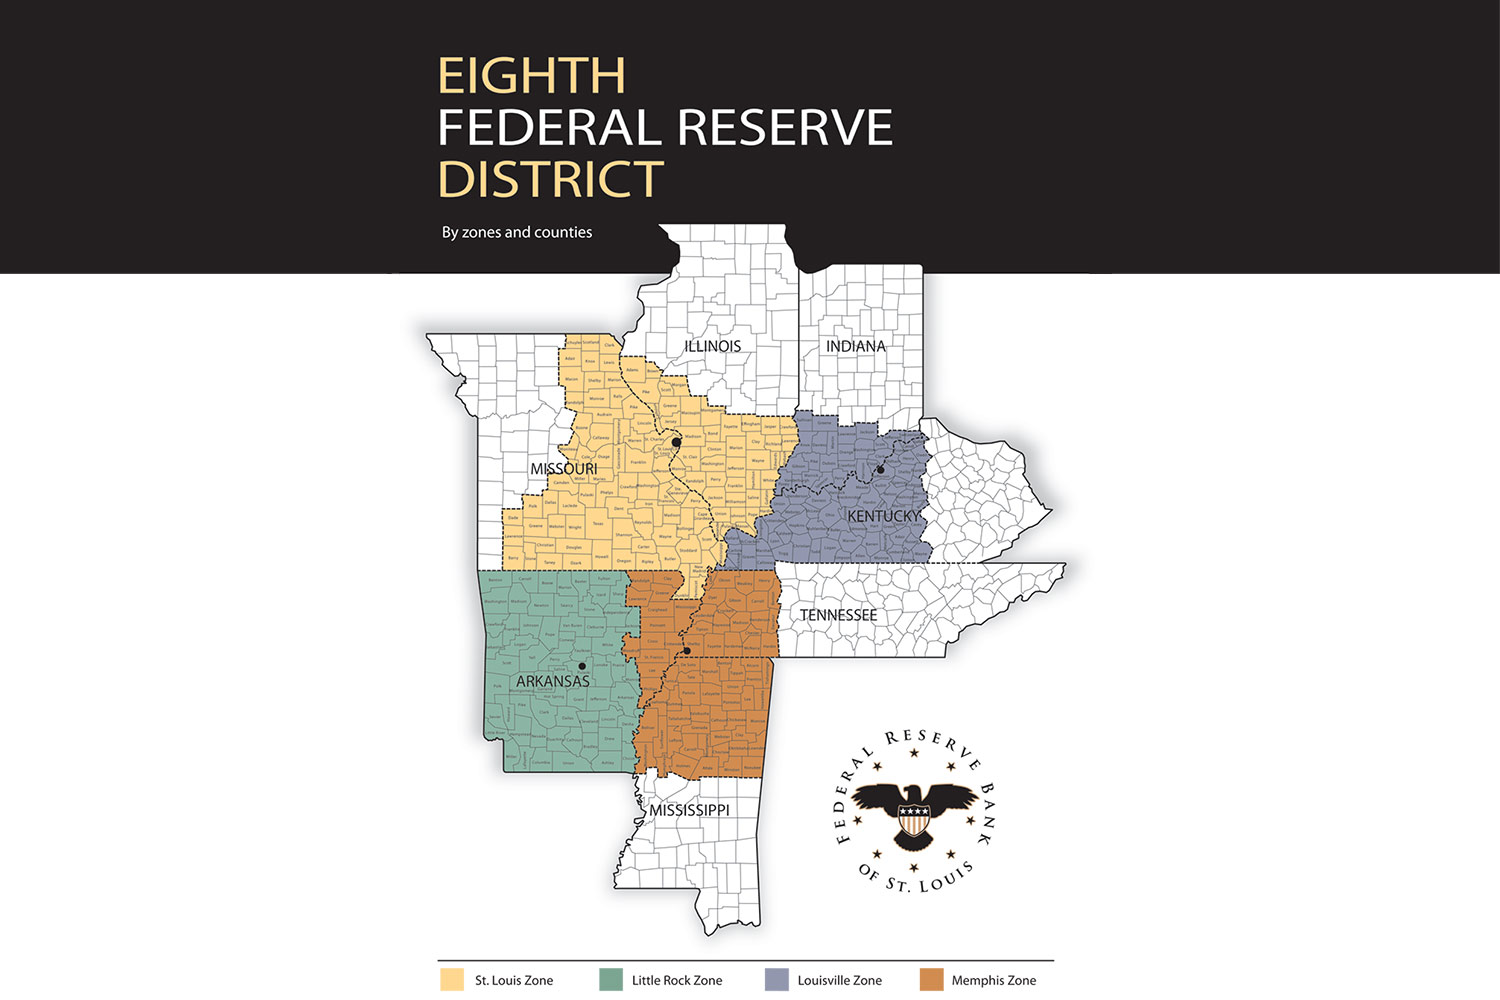 A map of the Eighth Federal Reserve District